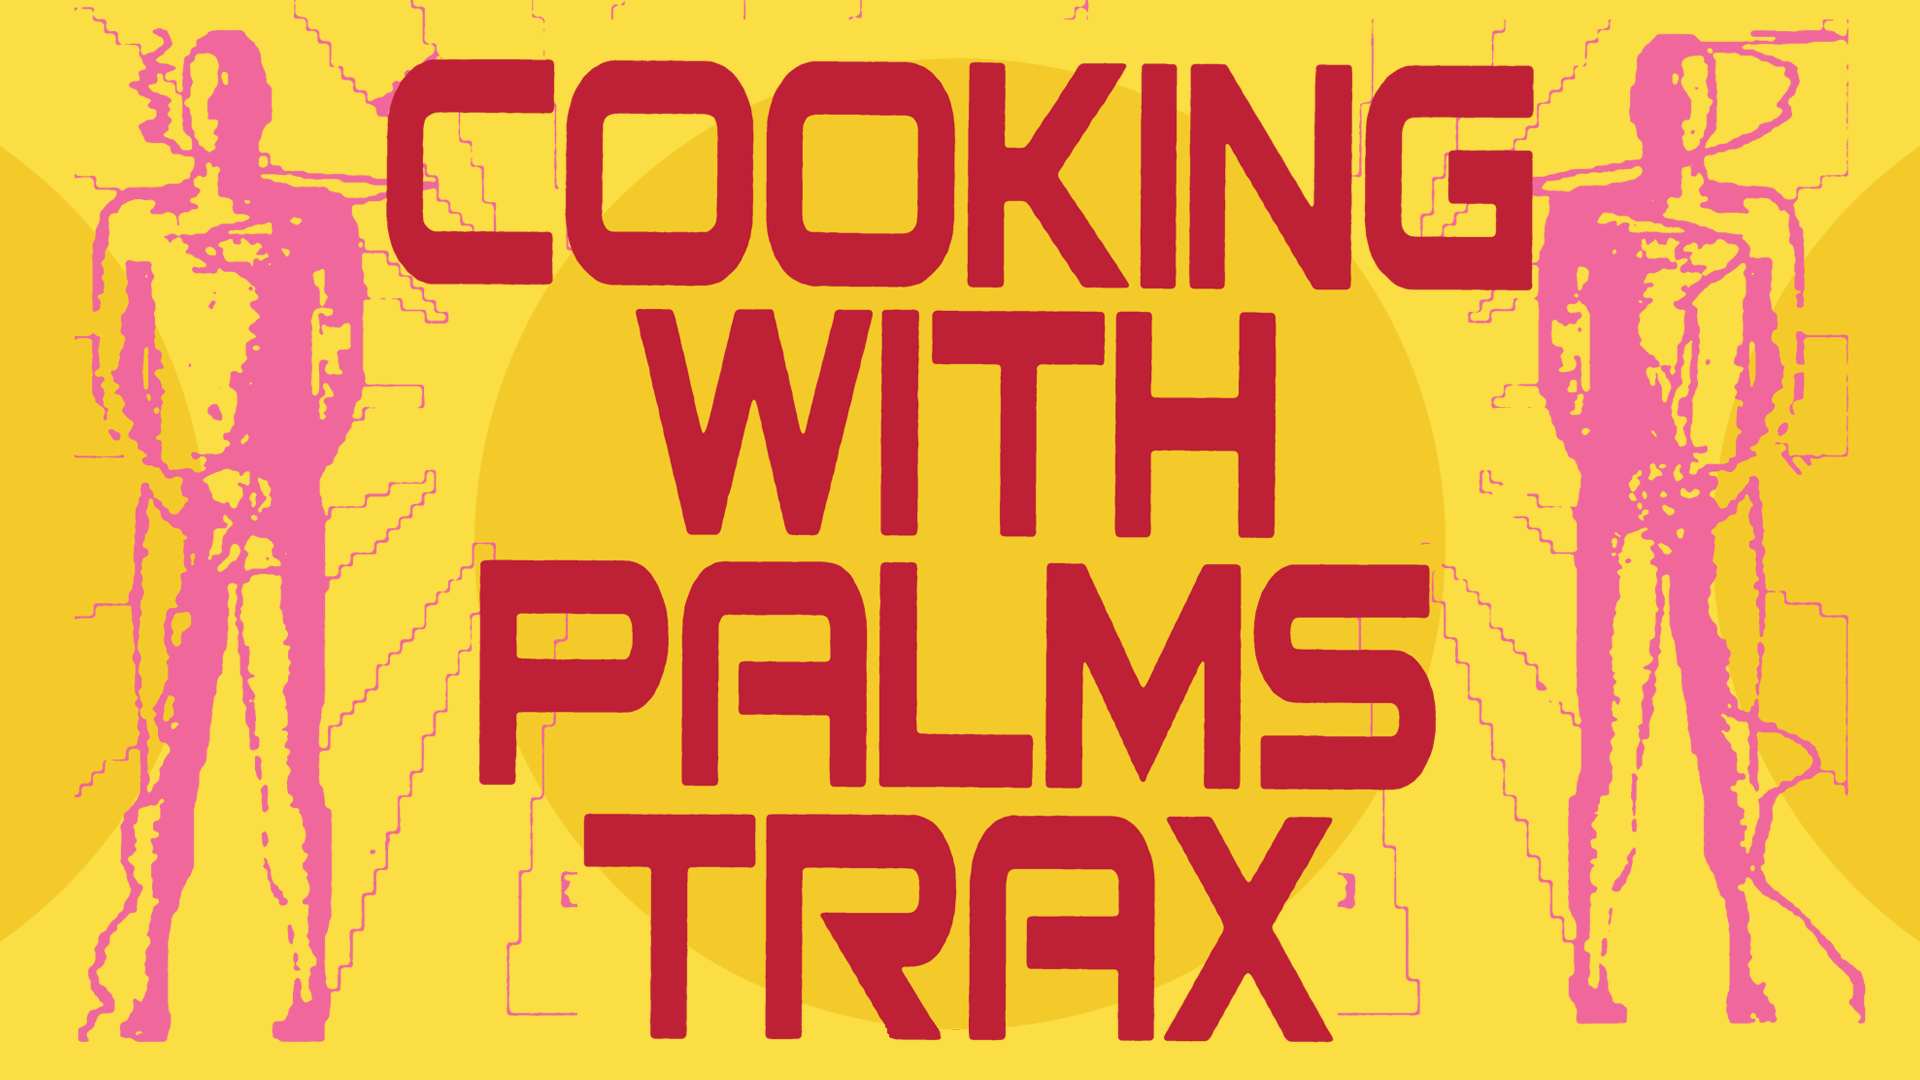 Else x Cooking with: Palms Trax, Prosumer, Jennifer Loveless, S-candalo, No Frills  - フライヤー表